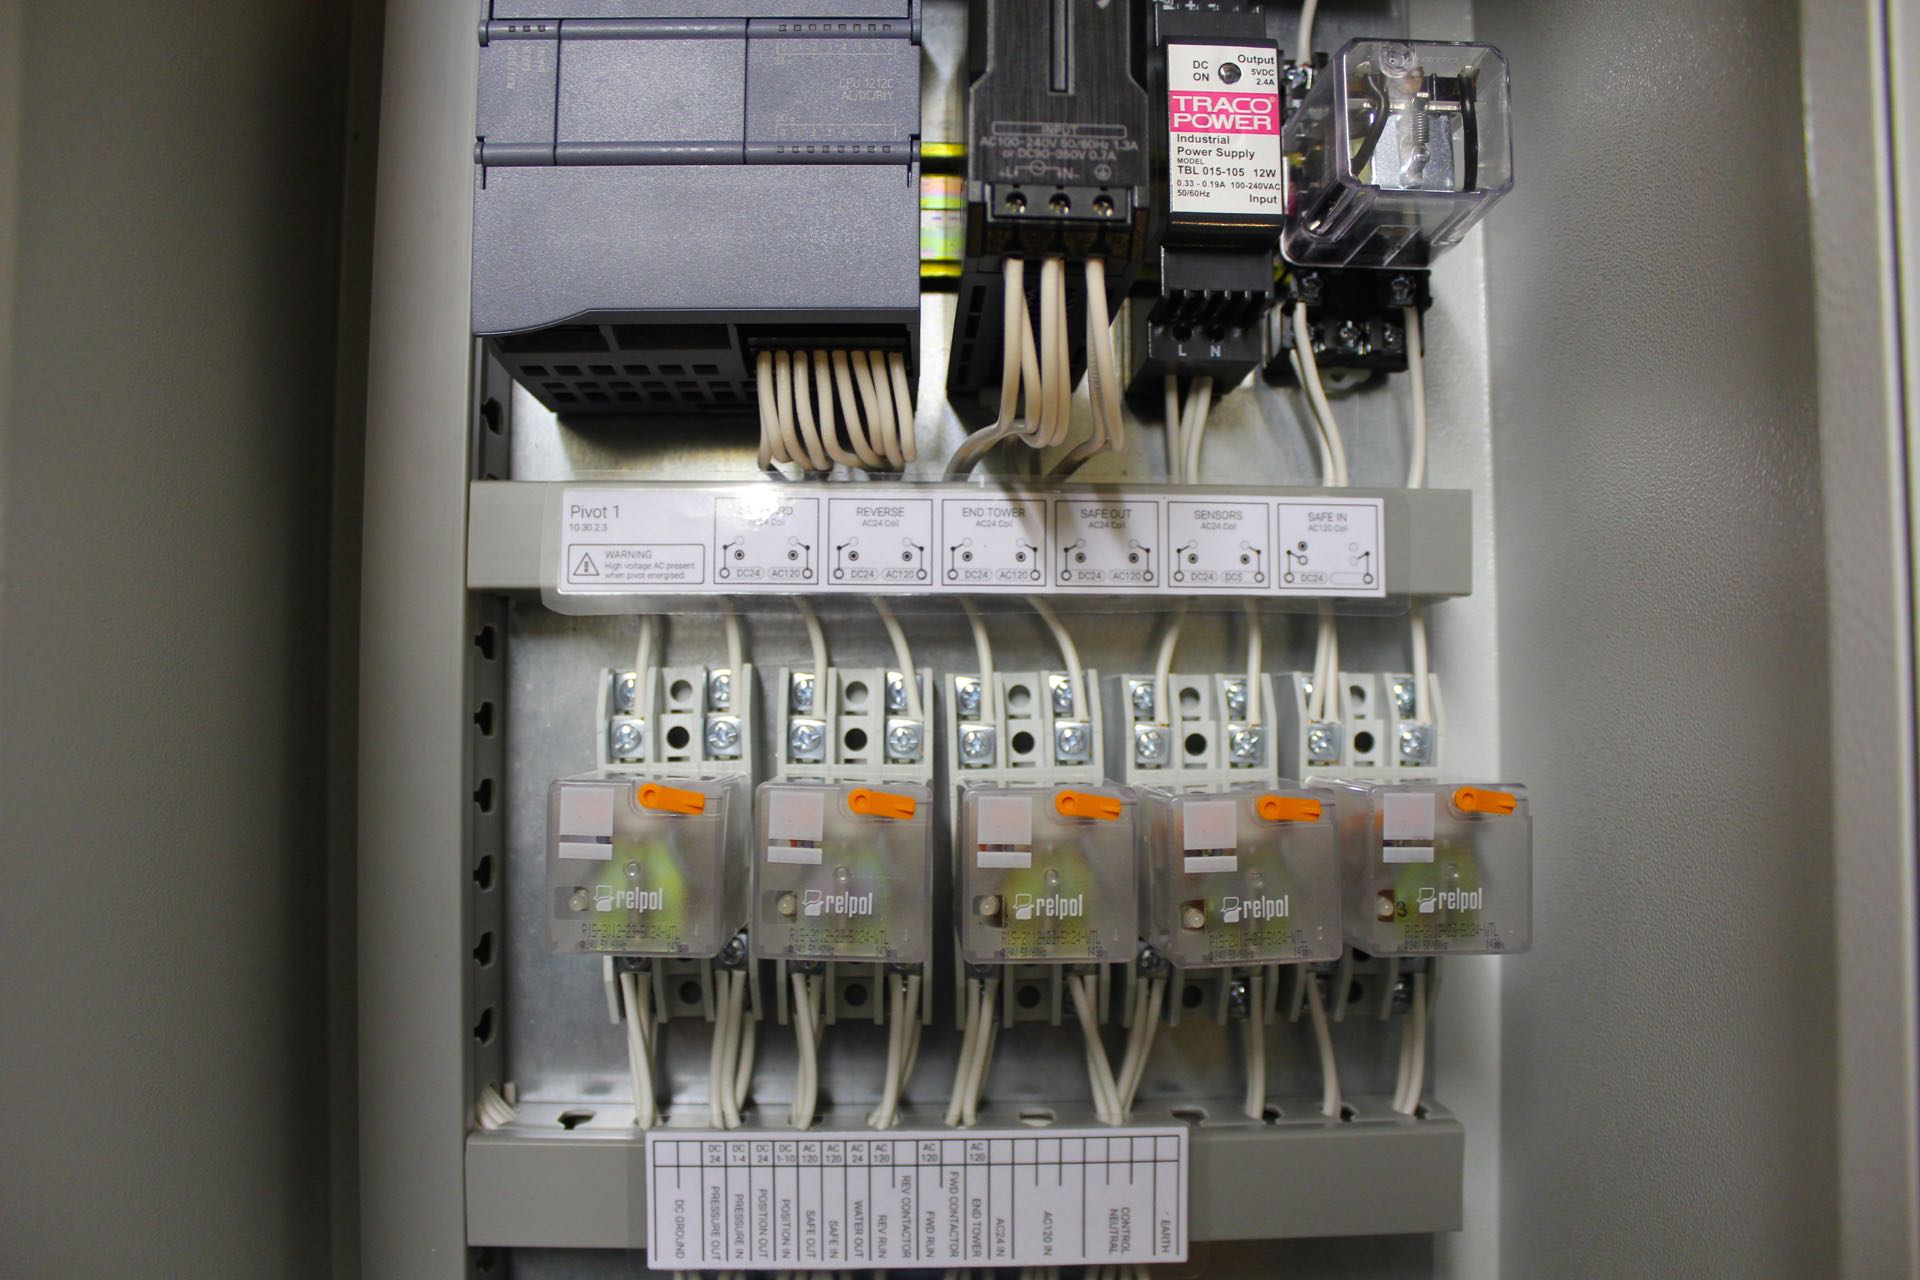 Remote backplane installed in cabinet